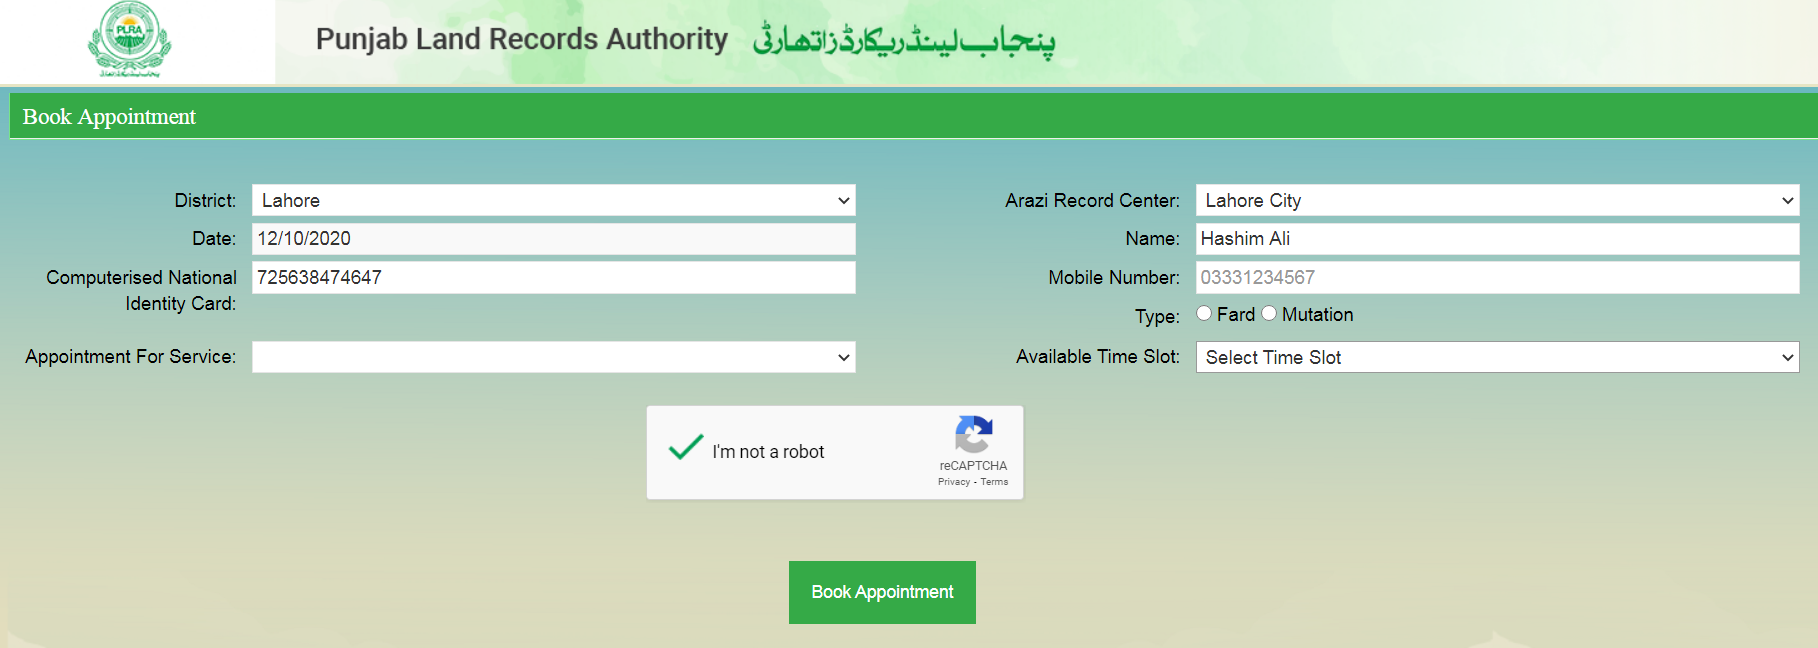 How Do I Get Appointment in Punjab Land Record Authority (PLRA) - EmployeesPortal